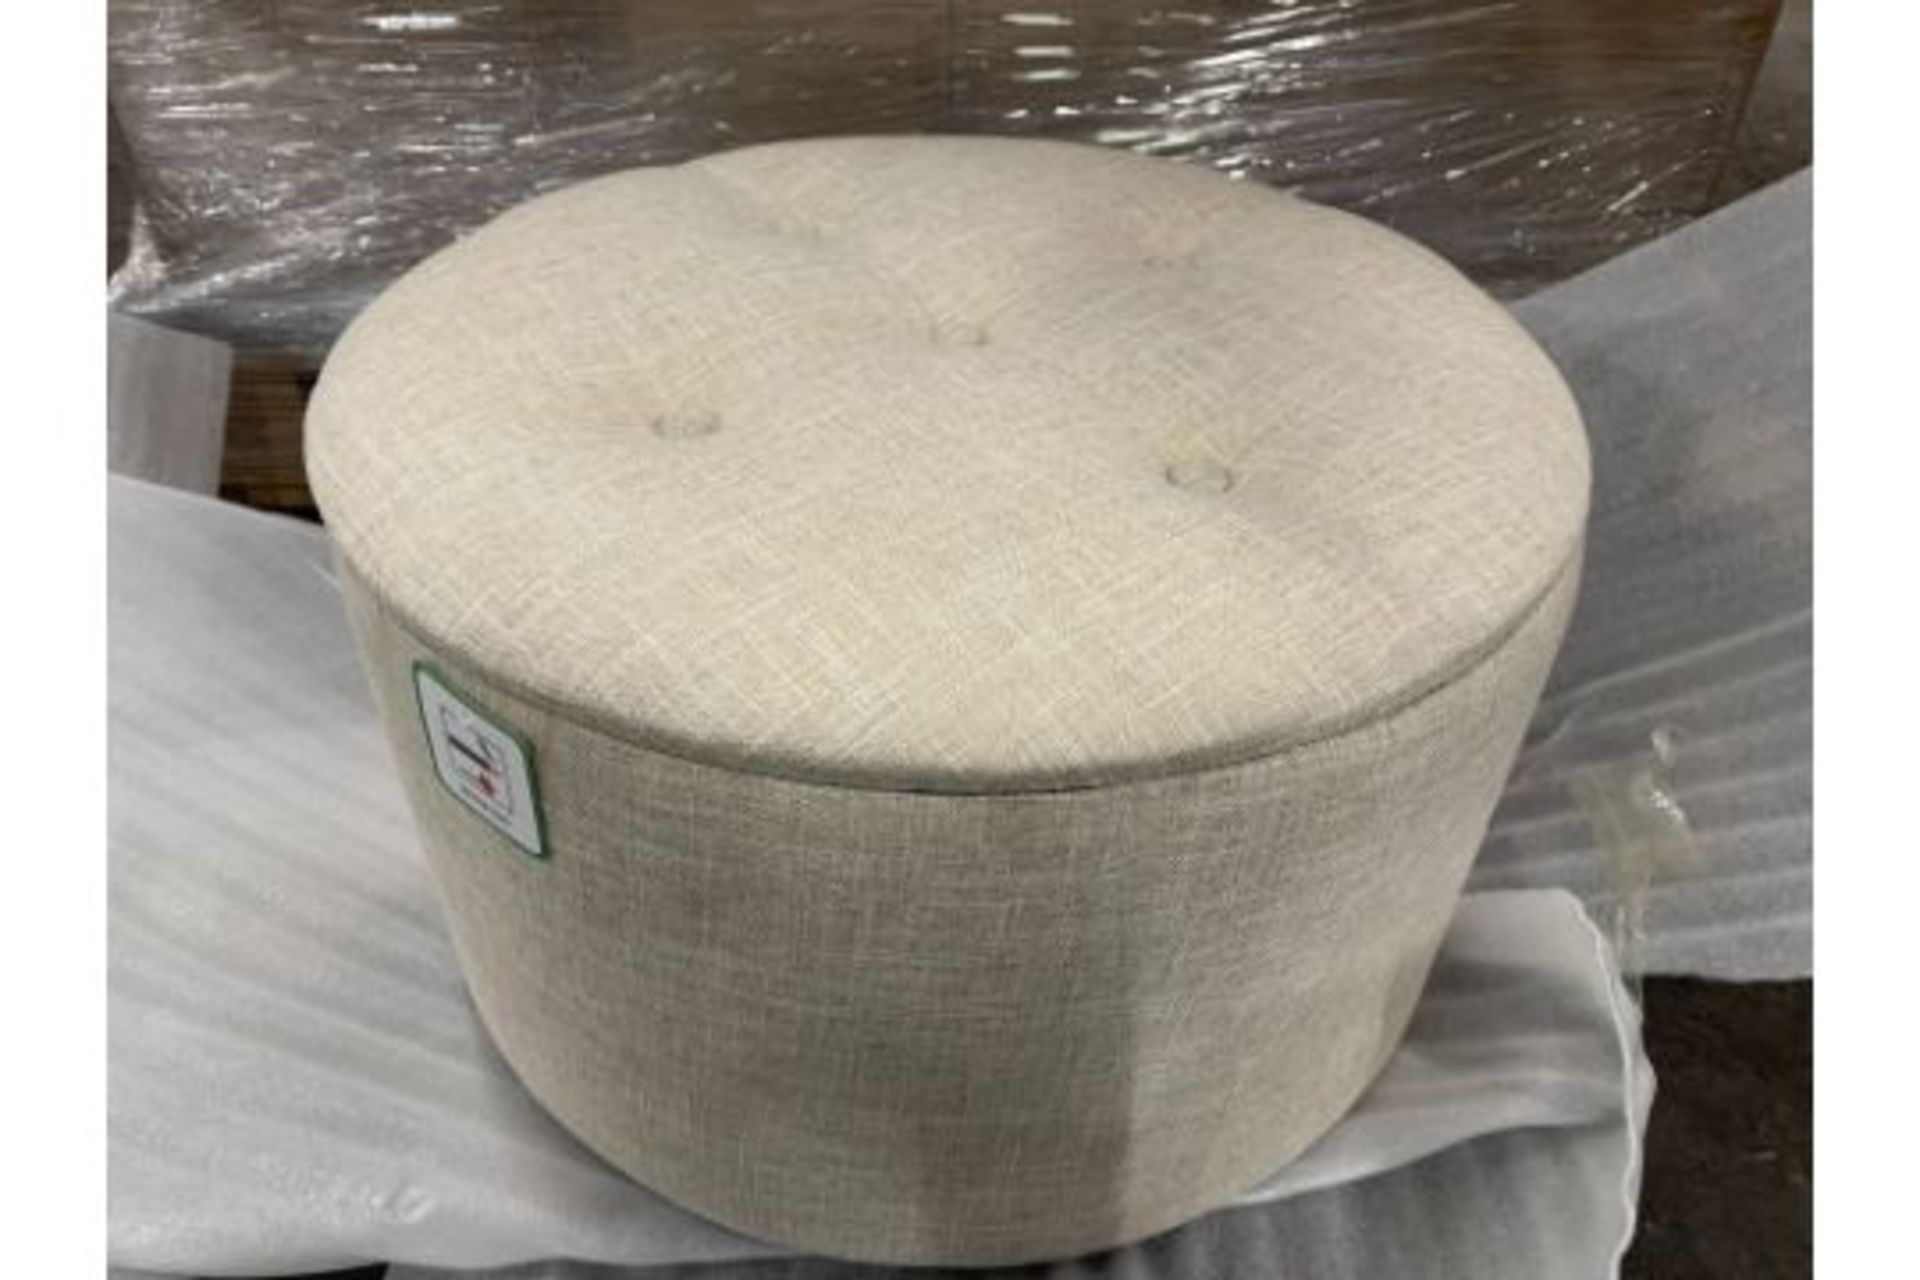 NEW LARGE CREAM ROUND 53CM OTTOMAN WITH STORAGE POCKETS - This round ottoman comes complete with a